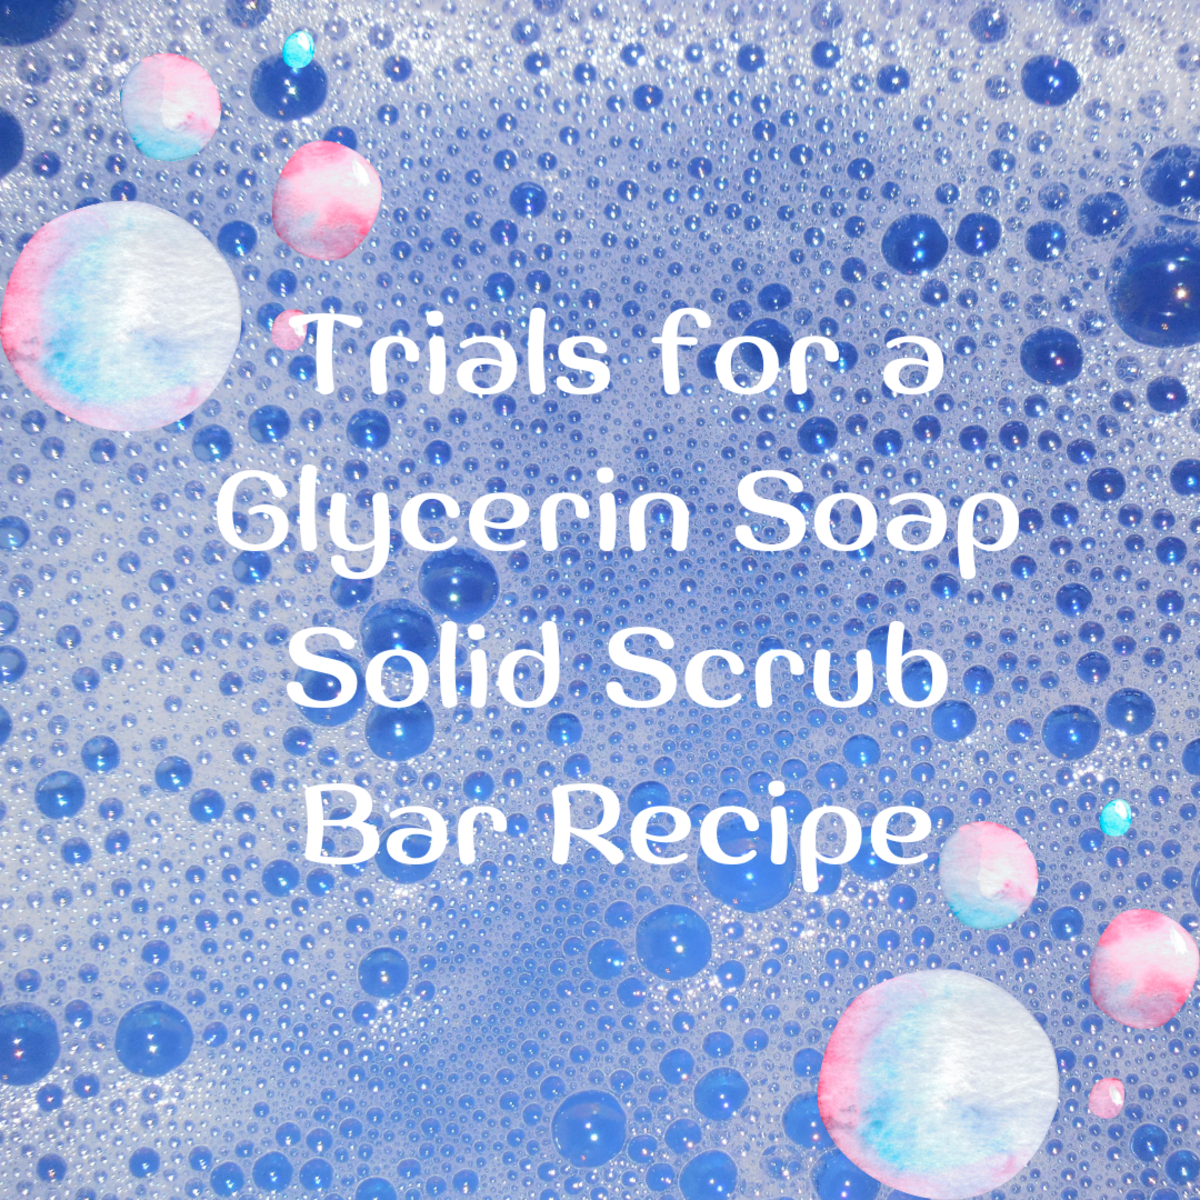 Below are recipes for glycerin soap. 